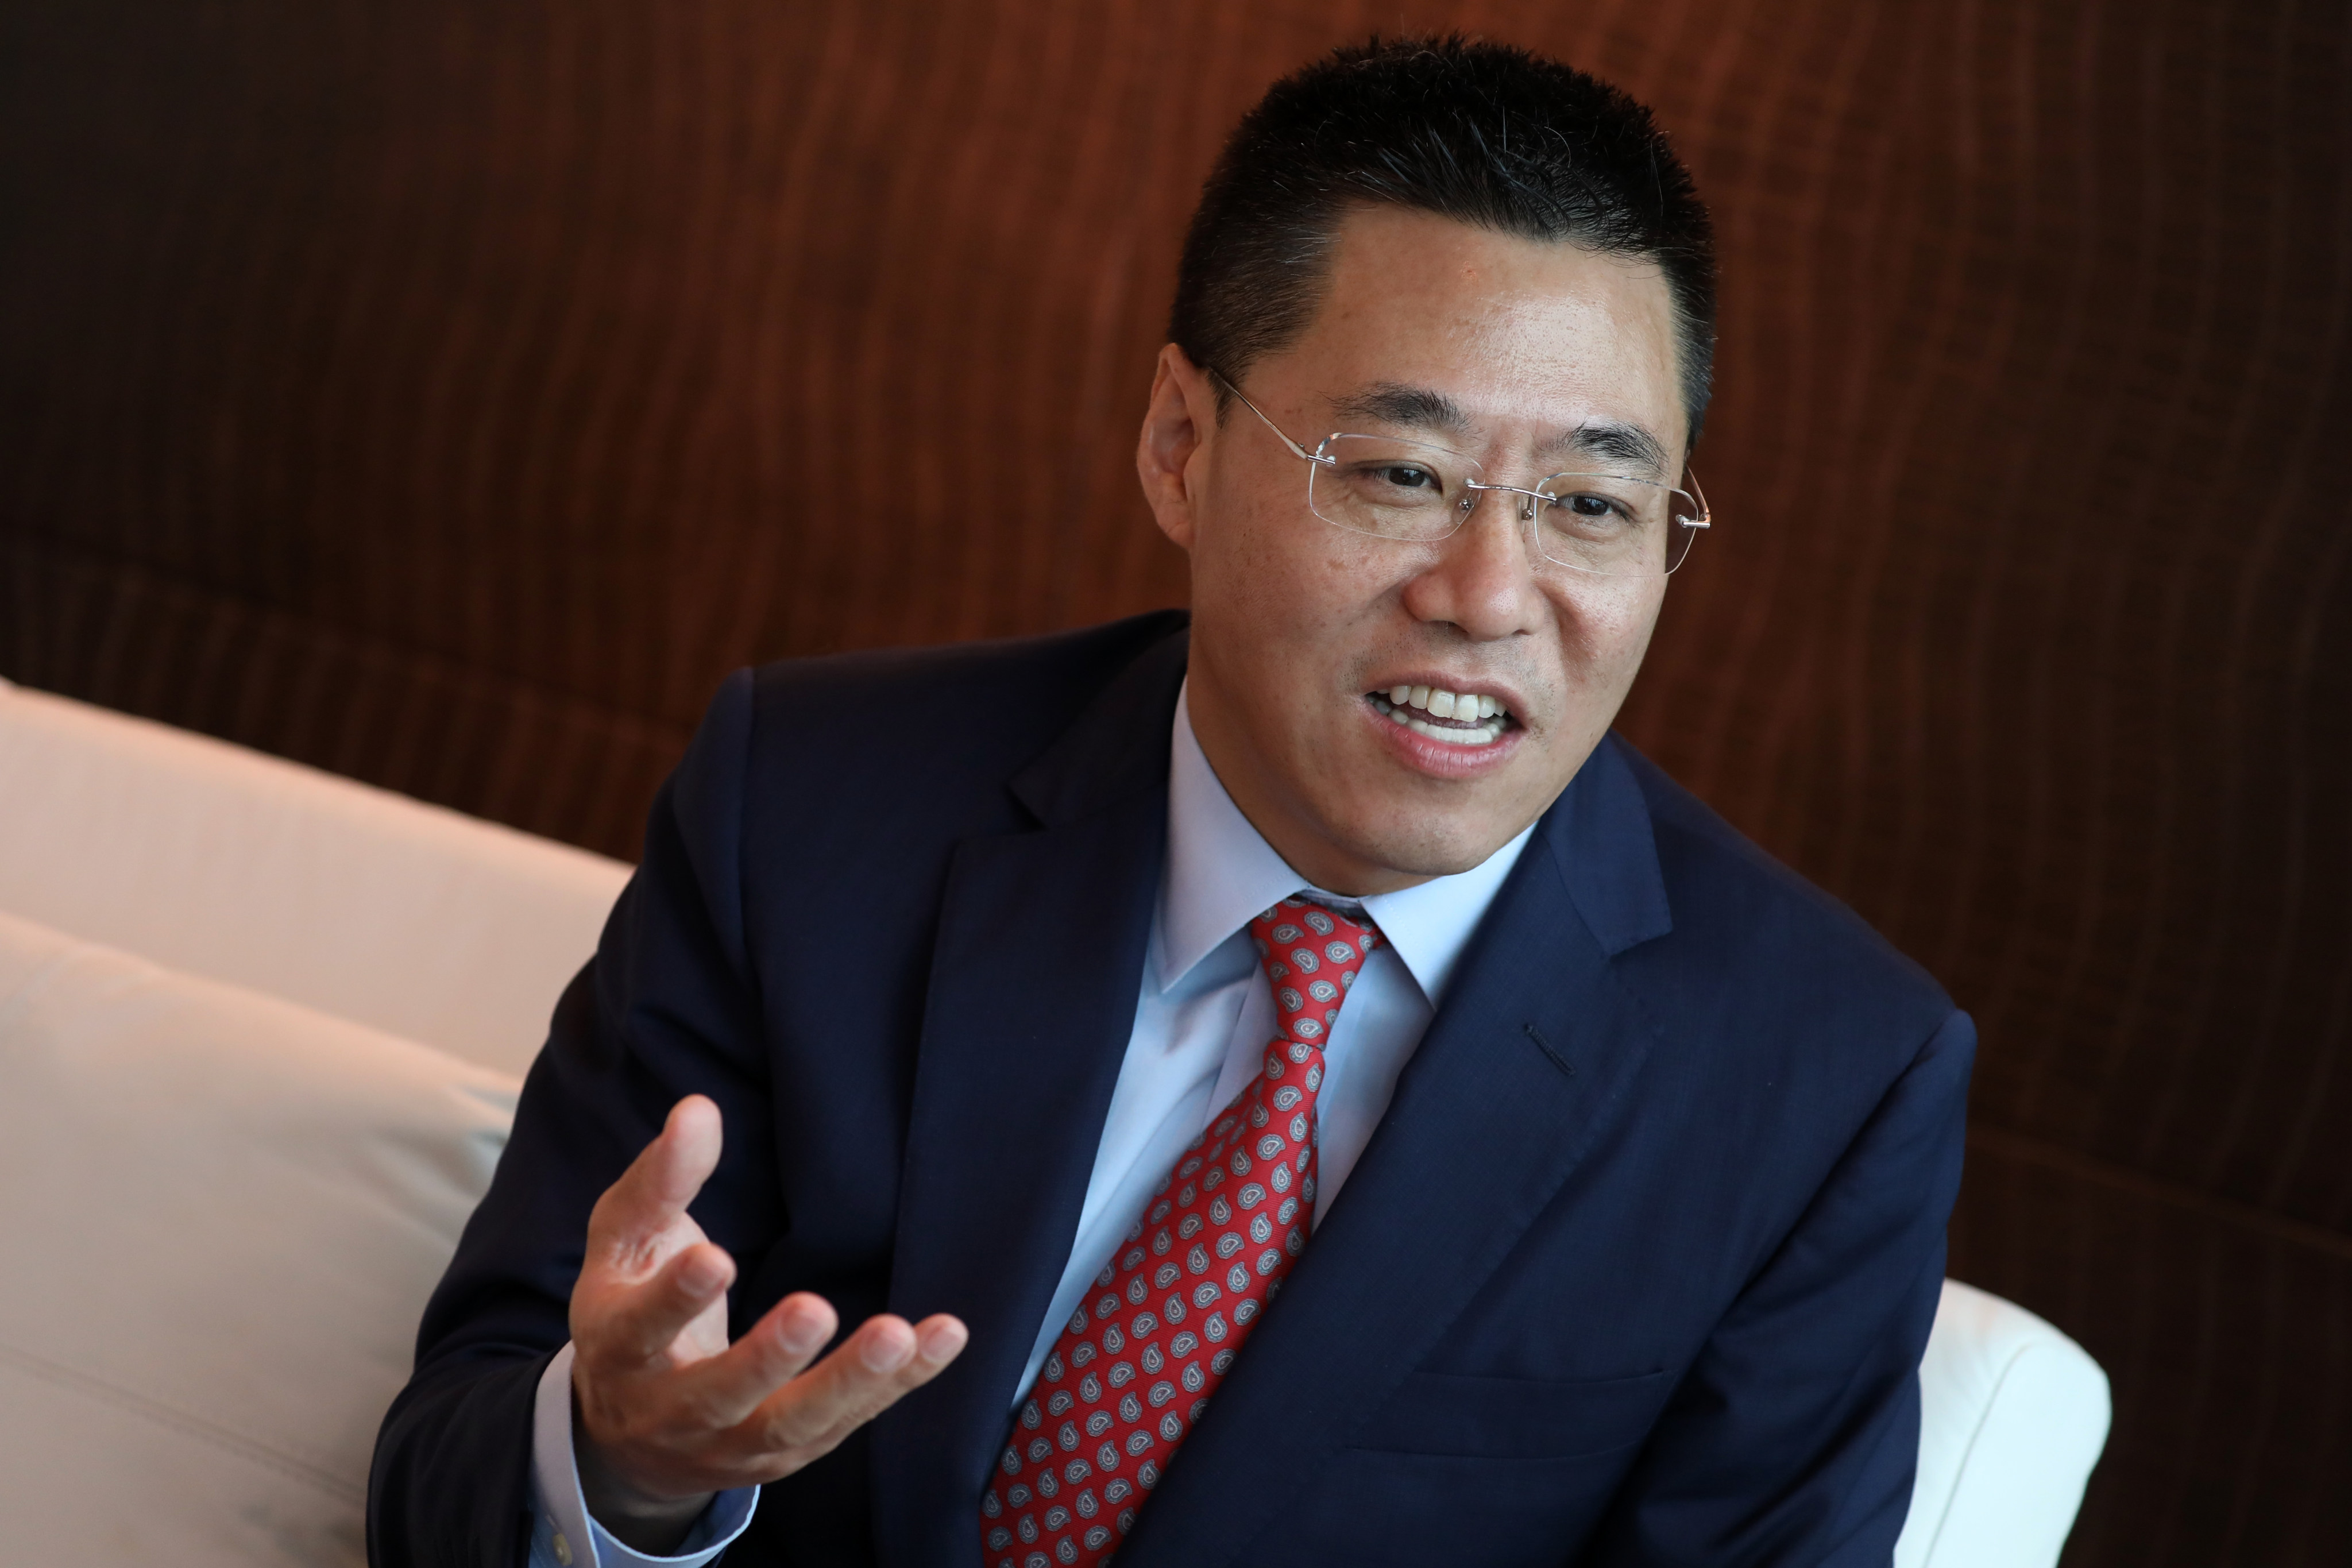 Chen Shuang, who resigned as CEO of China Everbright in 2019, is being investigated for ‘suspected violations of the law’, the CCDI said. Photo: Nora Tam